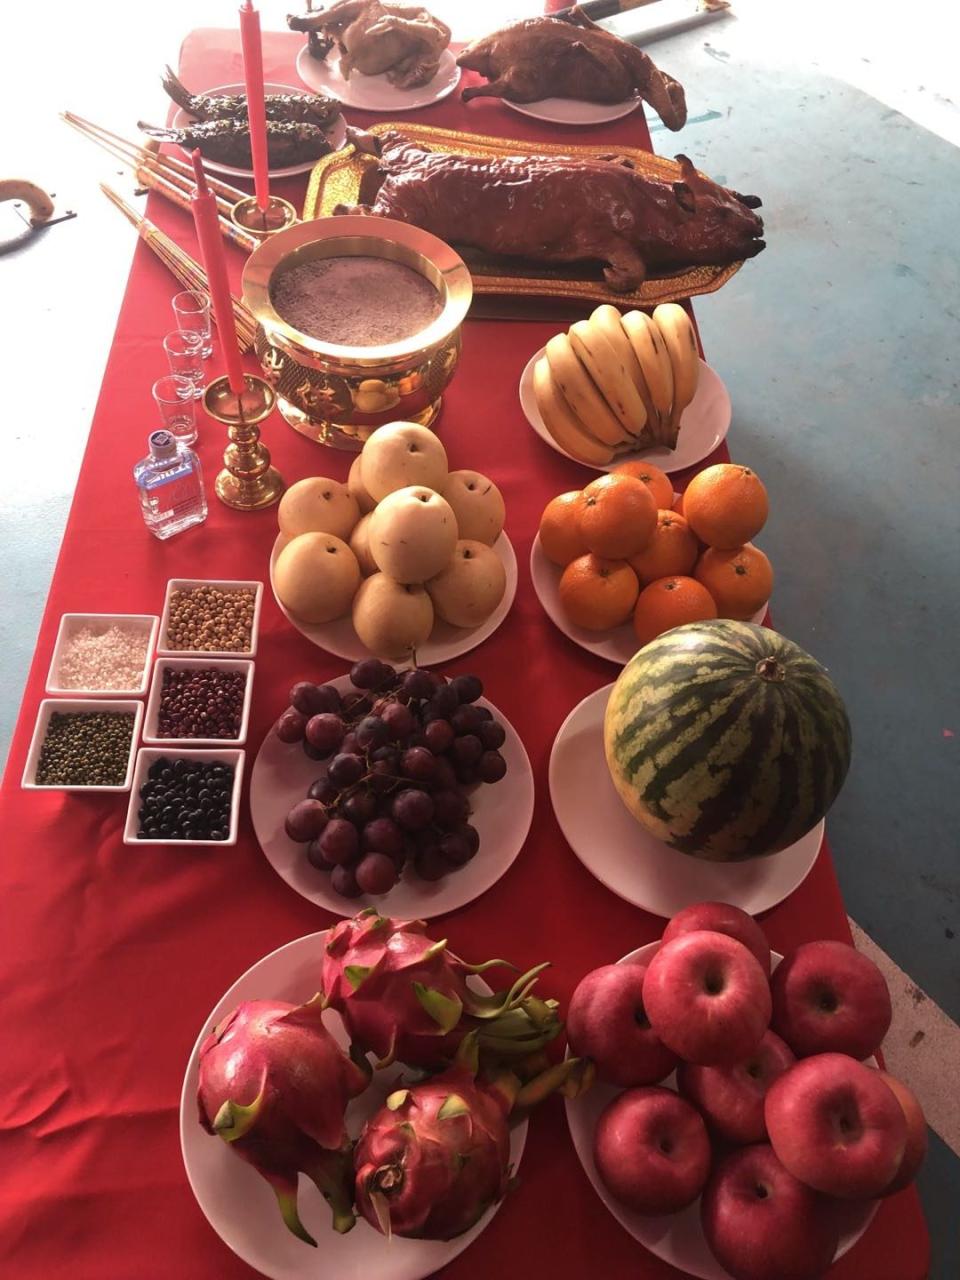 It’s a common practice in China for brands and agencies to offer fruits, roasted pig, and chicken, as well as liquor and five kinds of grains to deities at a praying ceremony prior to the event. - Credit: Courtesy